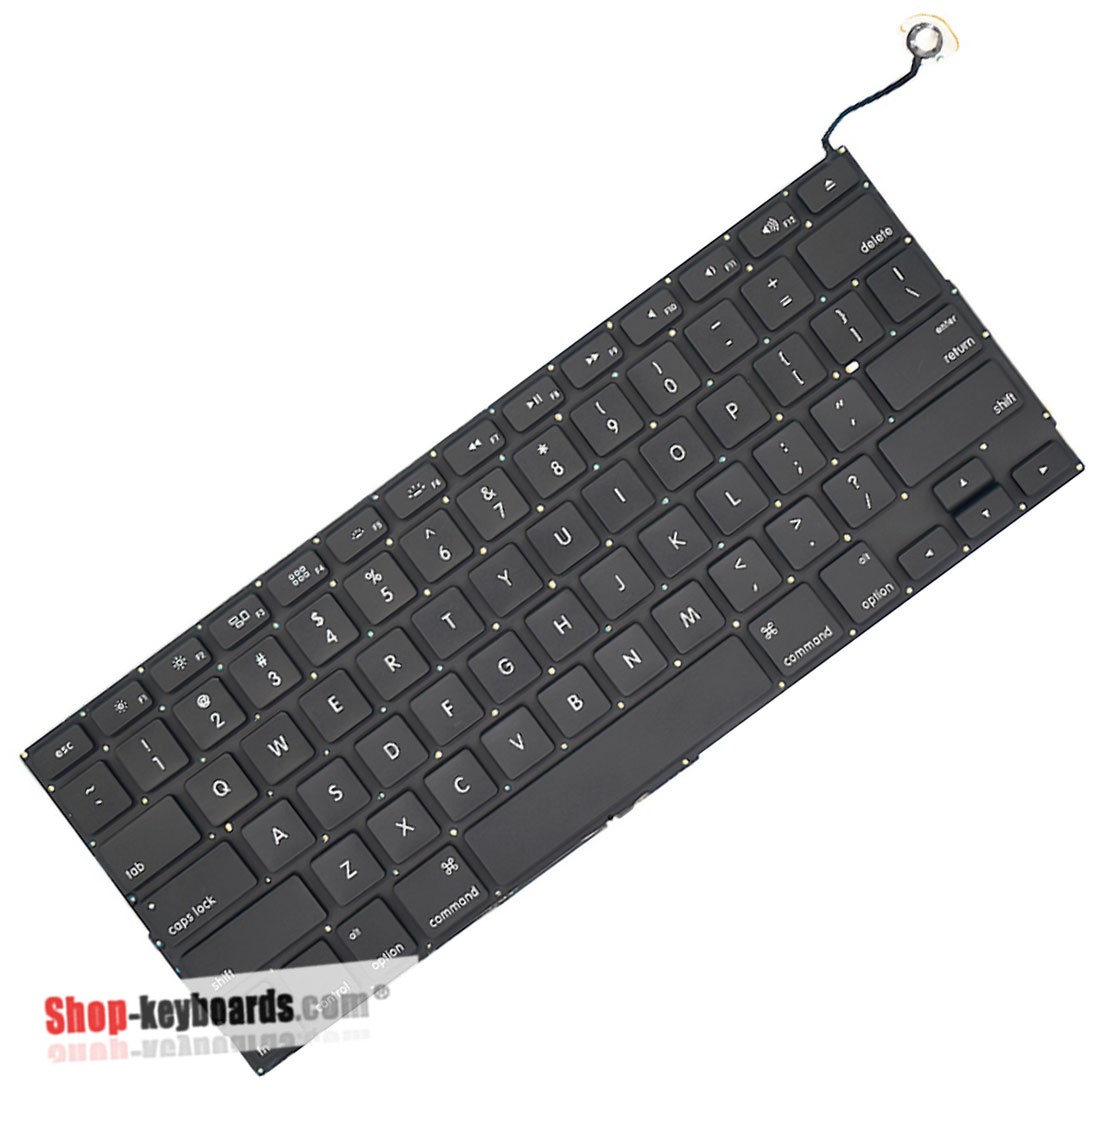 Apple MacBook Pro 15 inch MB986LL/A Keyboard replacement